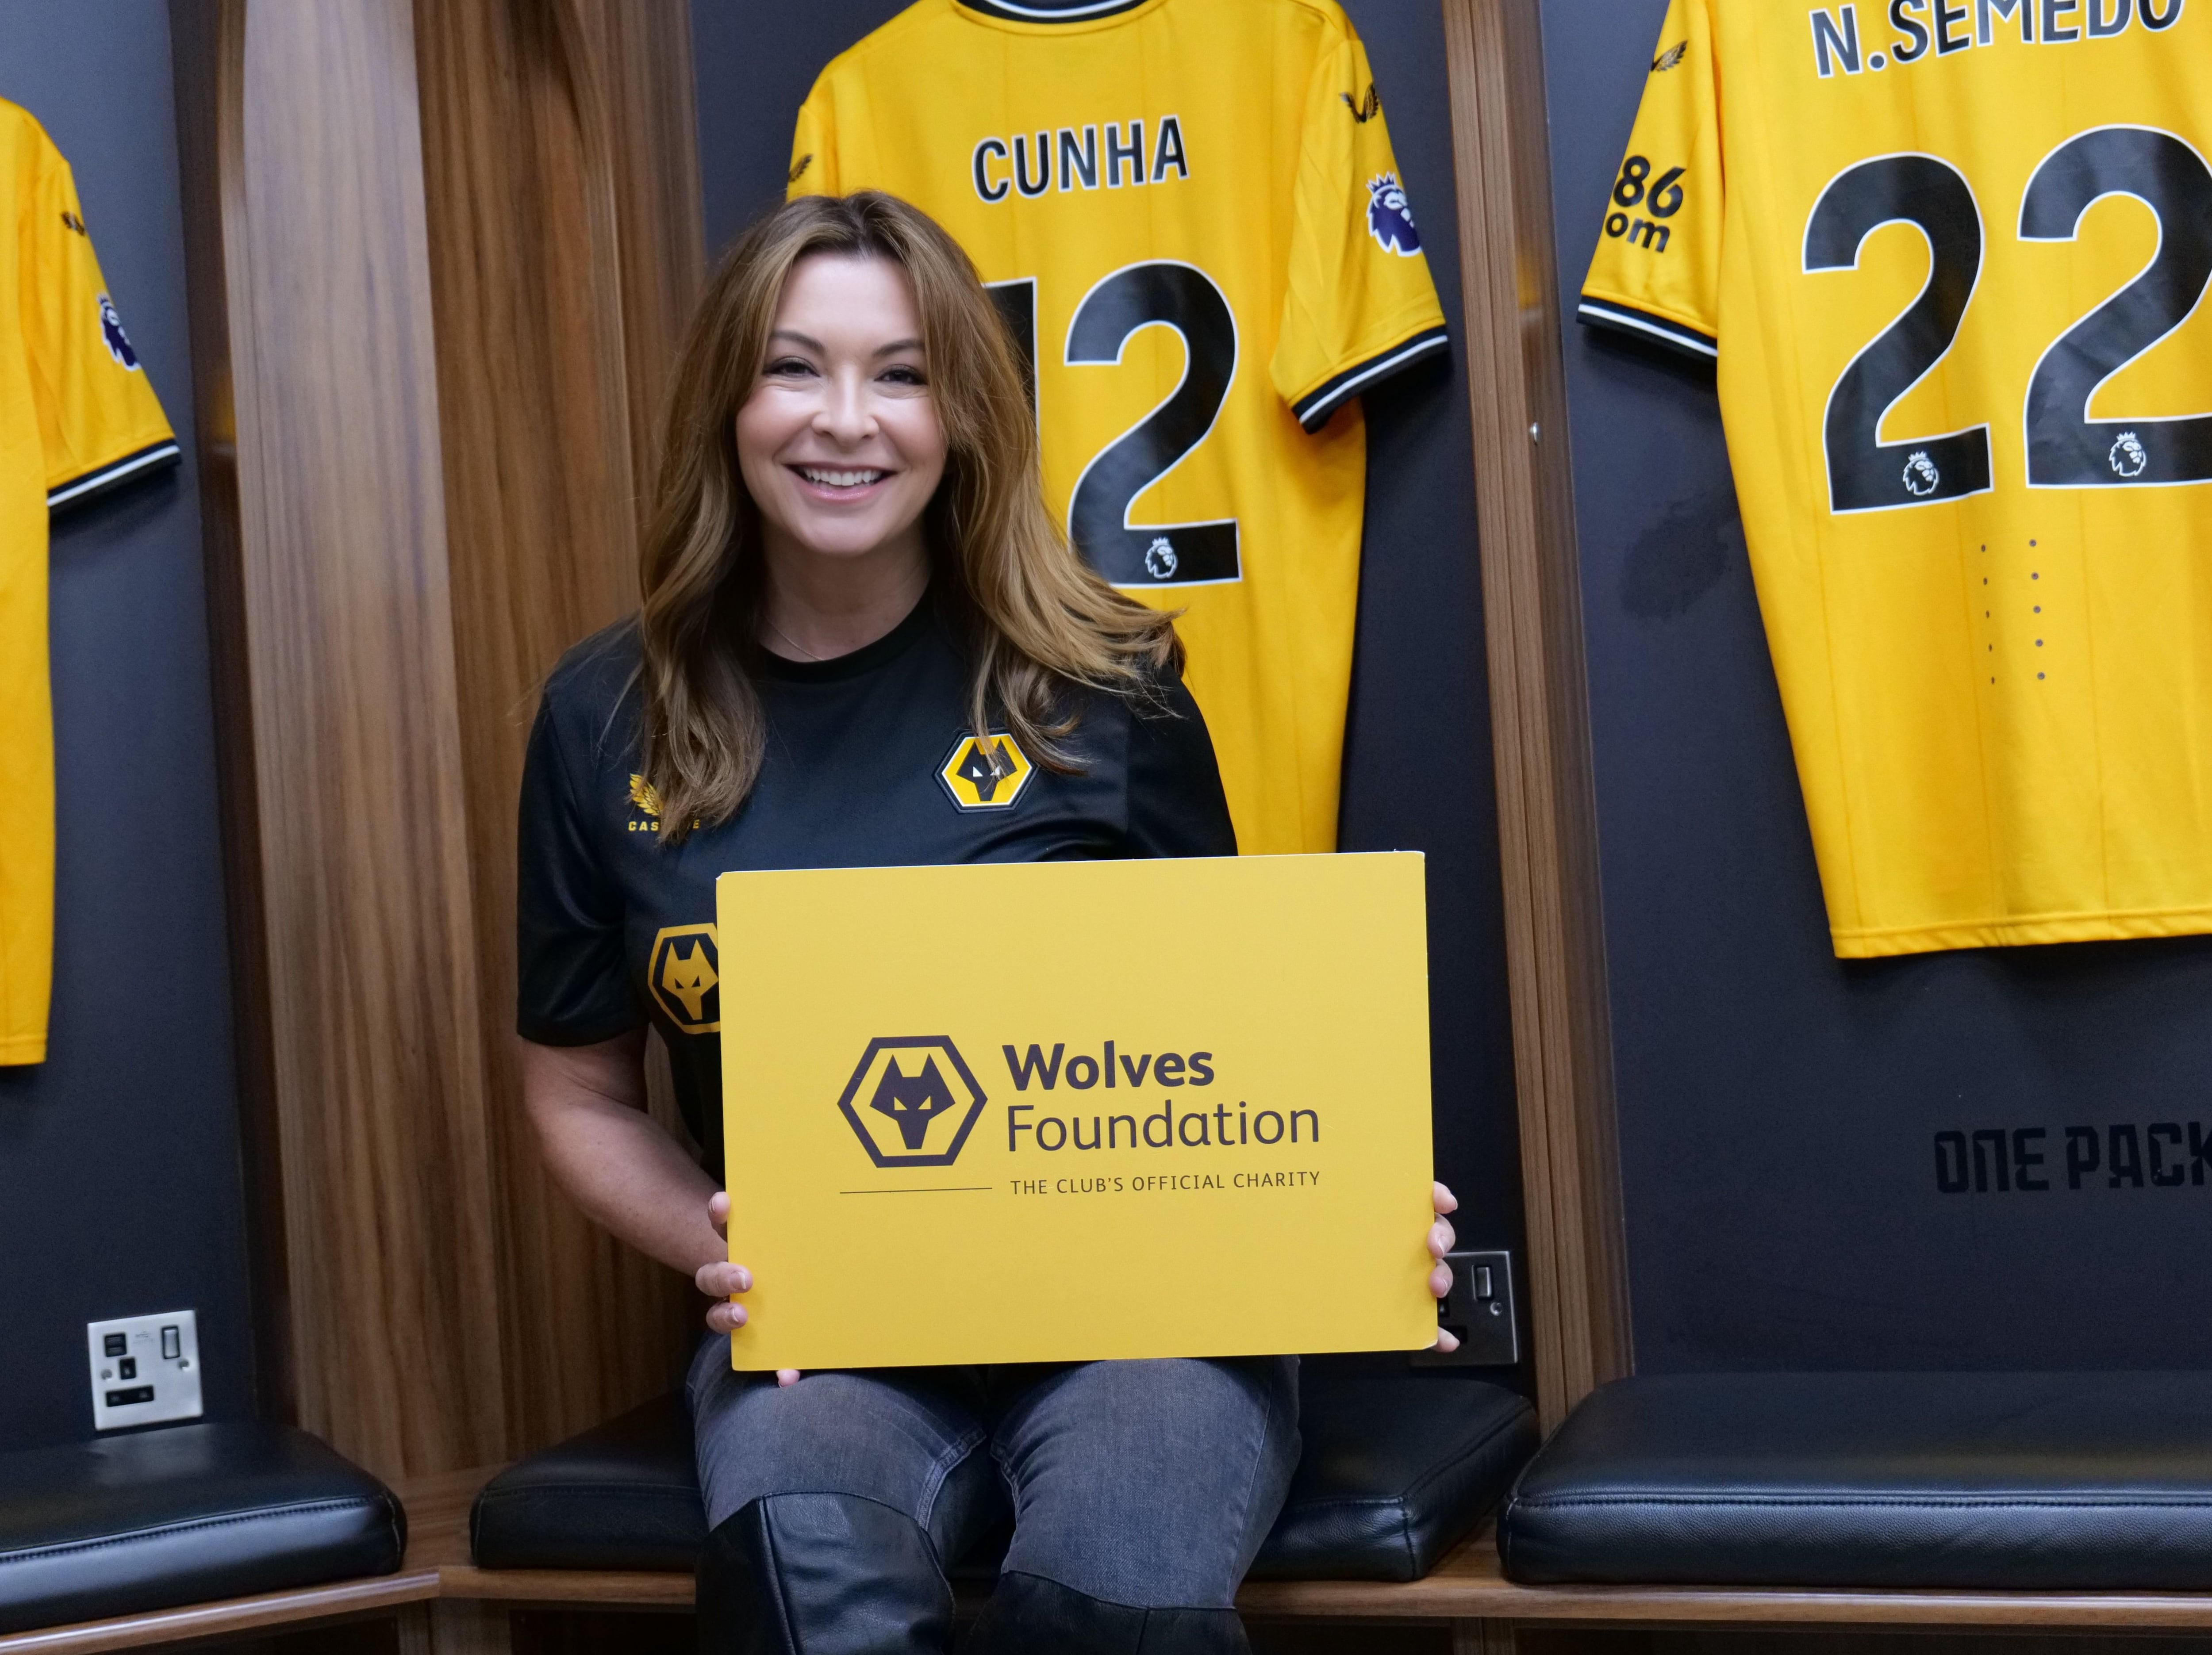 Wolves fan and broadcaster Suzi Perry proud to represent club and city as new foundation ambassador